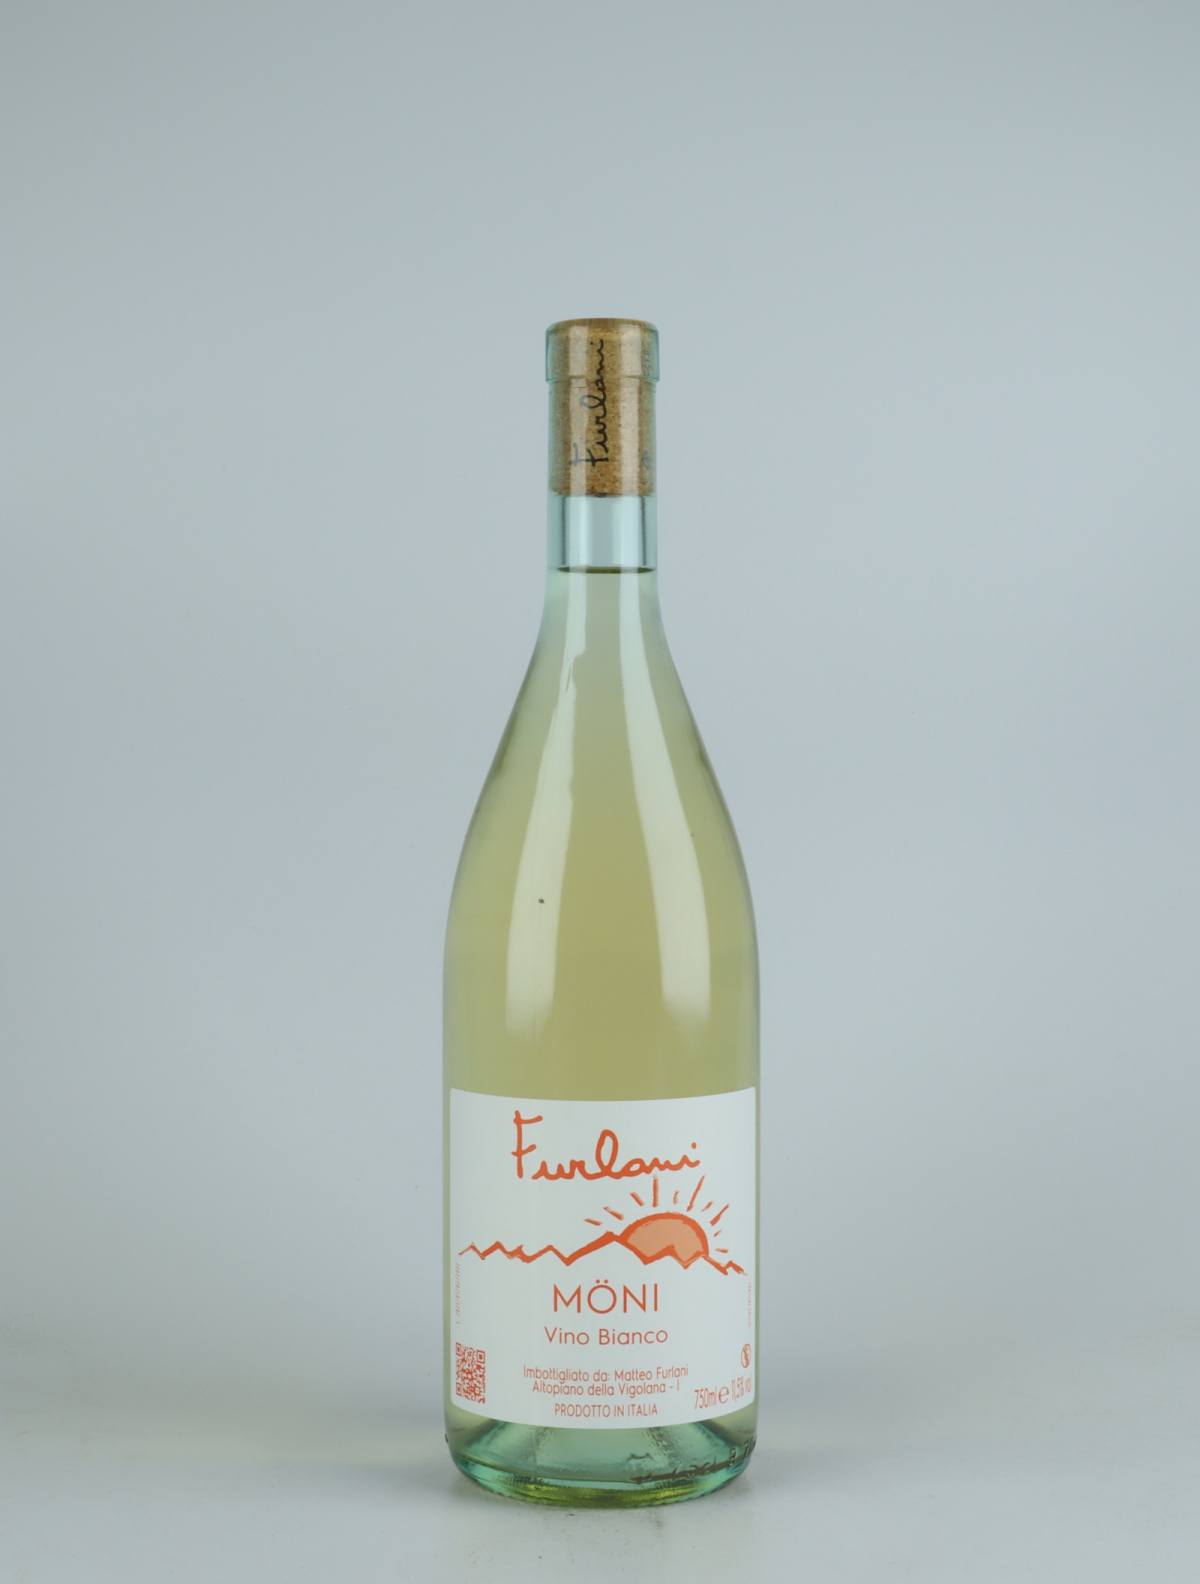 A bottle 2020 Bianco Möni White wine from Cantina Furlani, Alto Adige in Italy